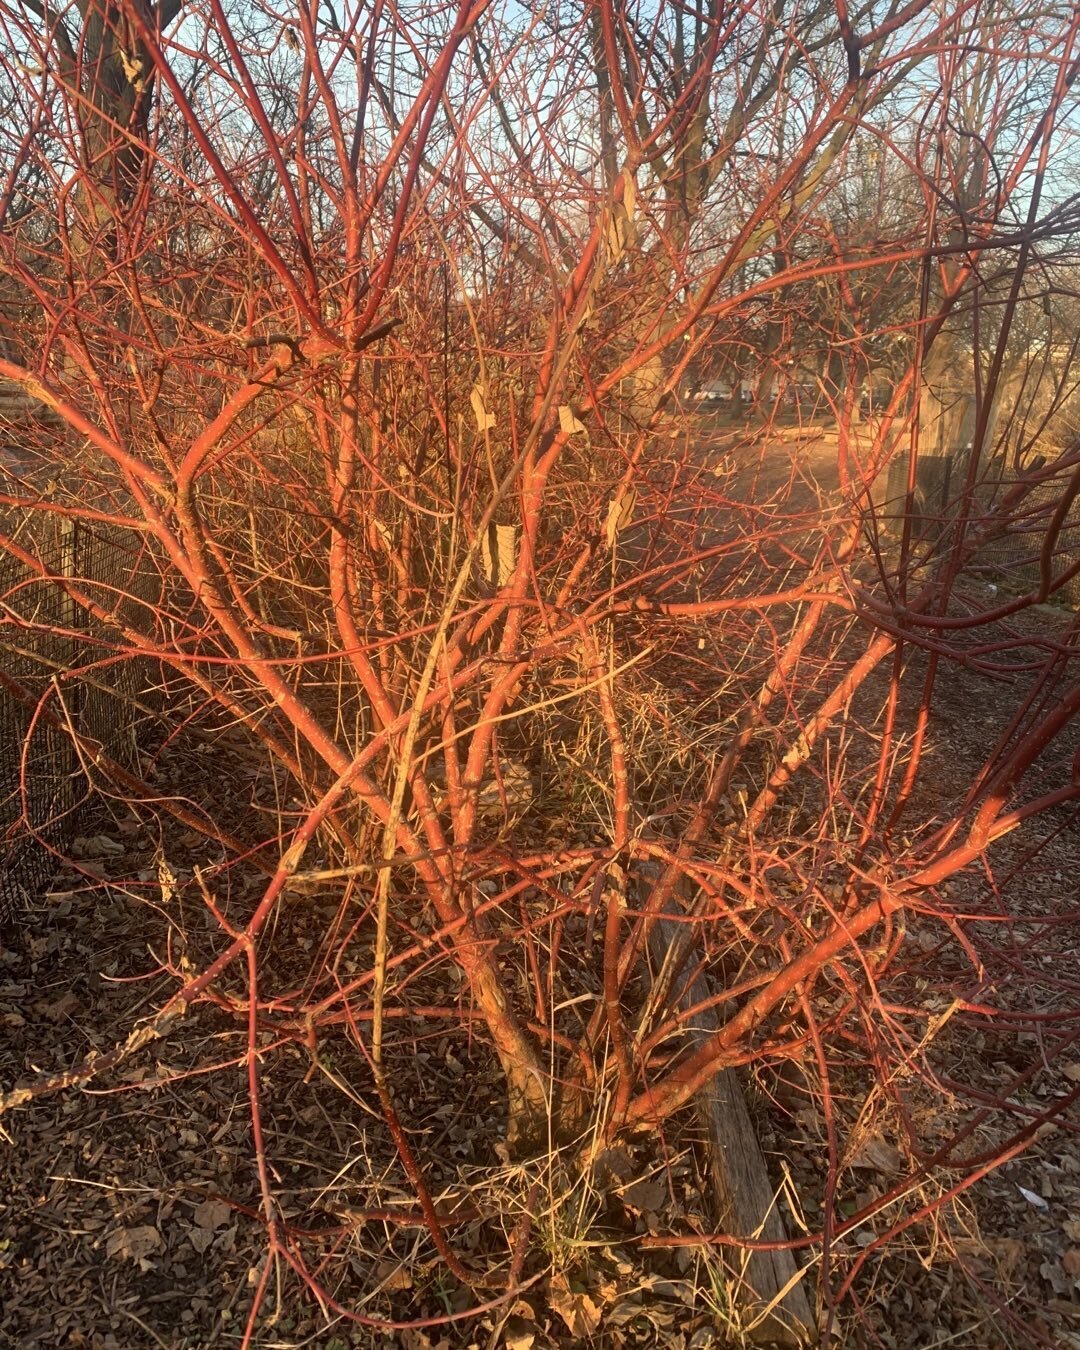 Red branches dancing in the setting sun in the West☀️